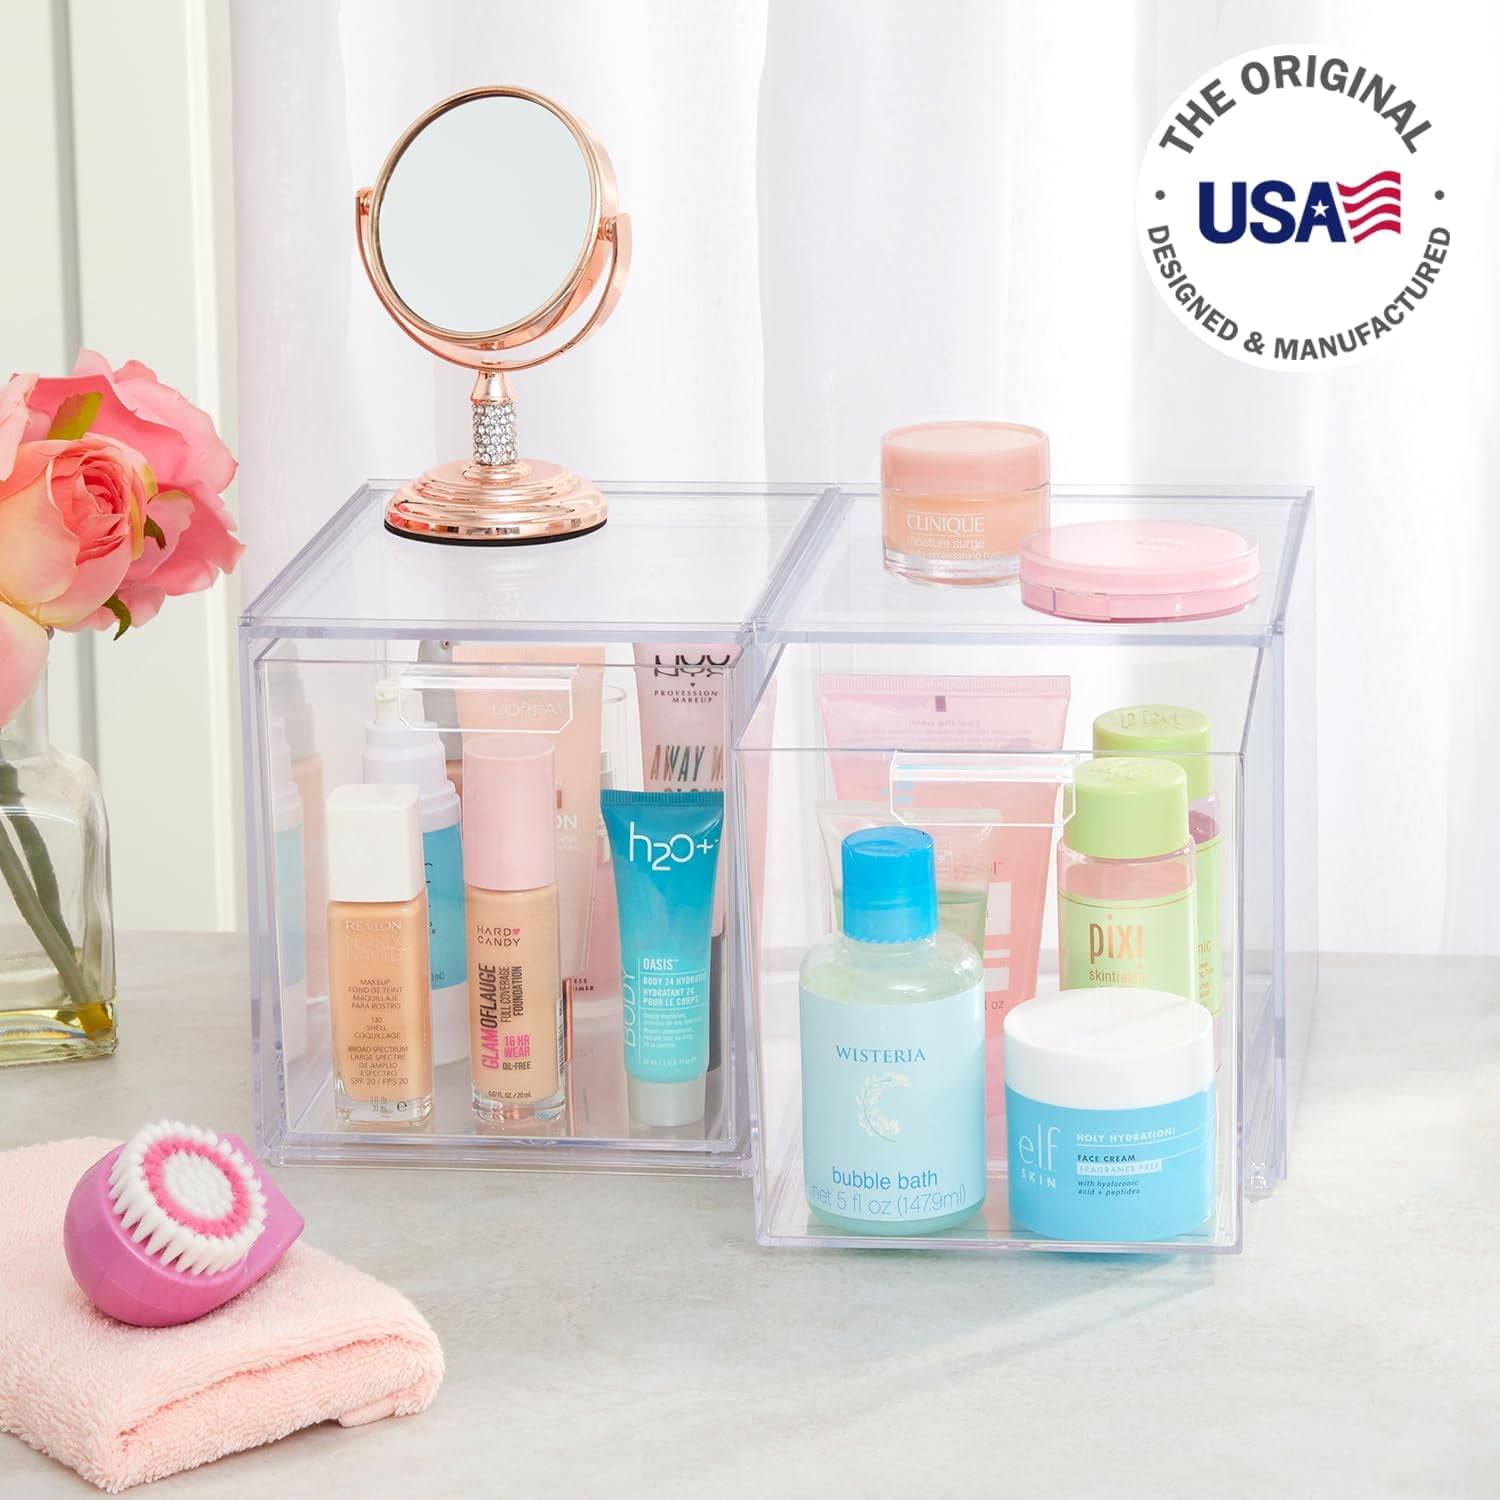 Buying Guide, STORi Audrey Stackable Bin Clear Plastic Organizer Drawers